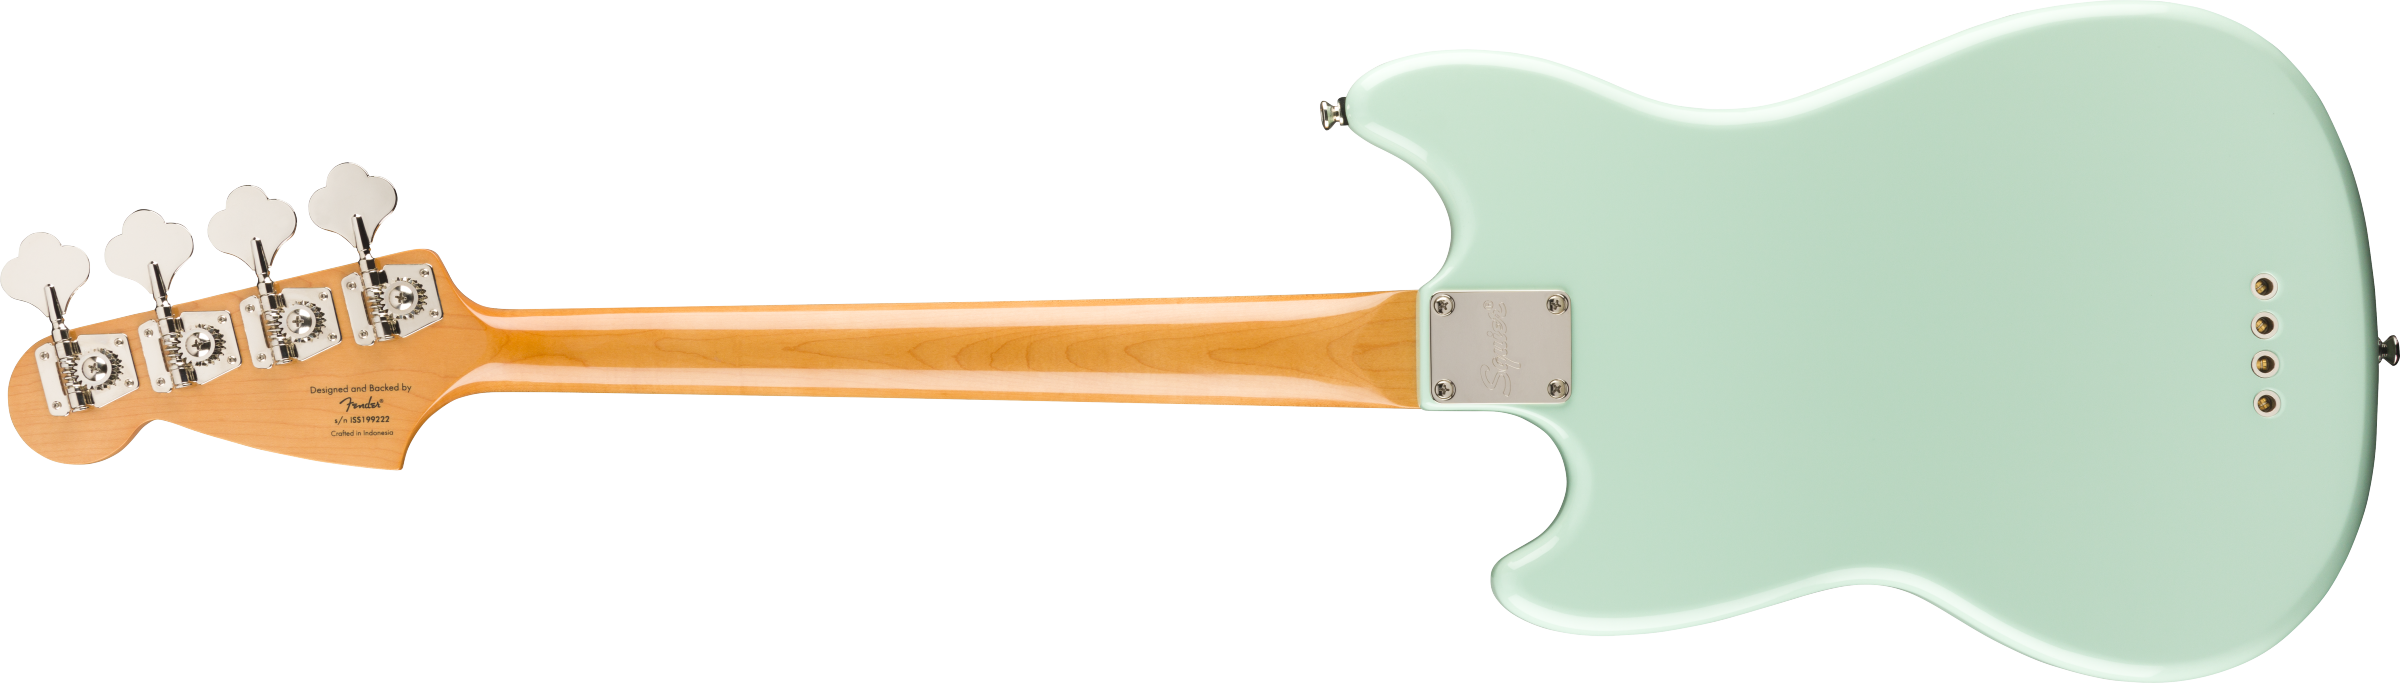 Squier Classic Vibe 60s Mustang Bass, Surf Green 0374570557